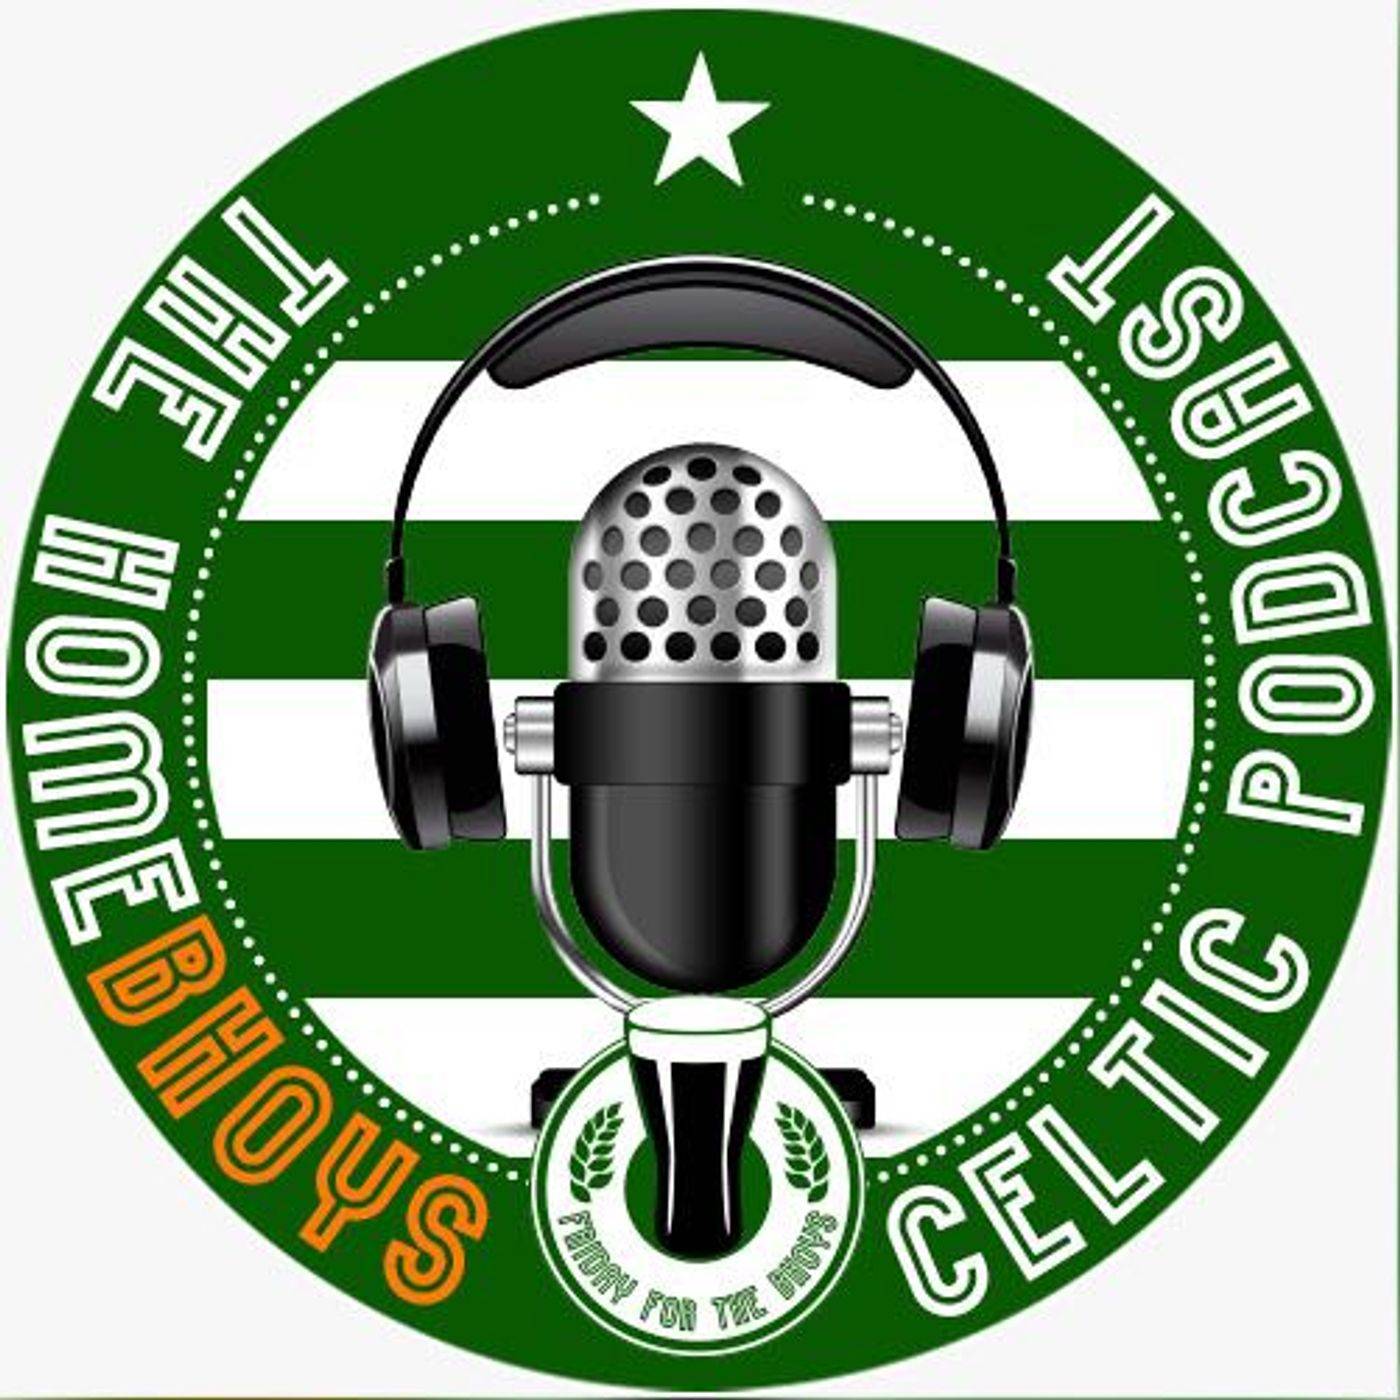 HomeBhoys #381 – A Tale of Two 6’s!